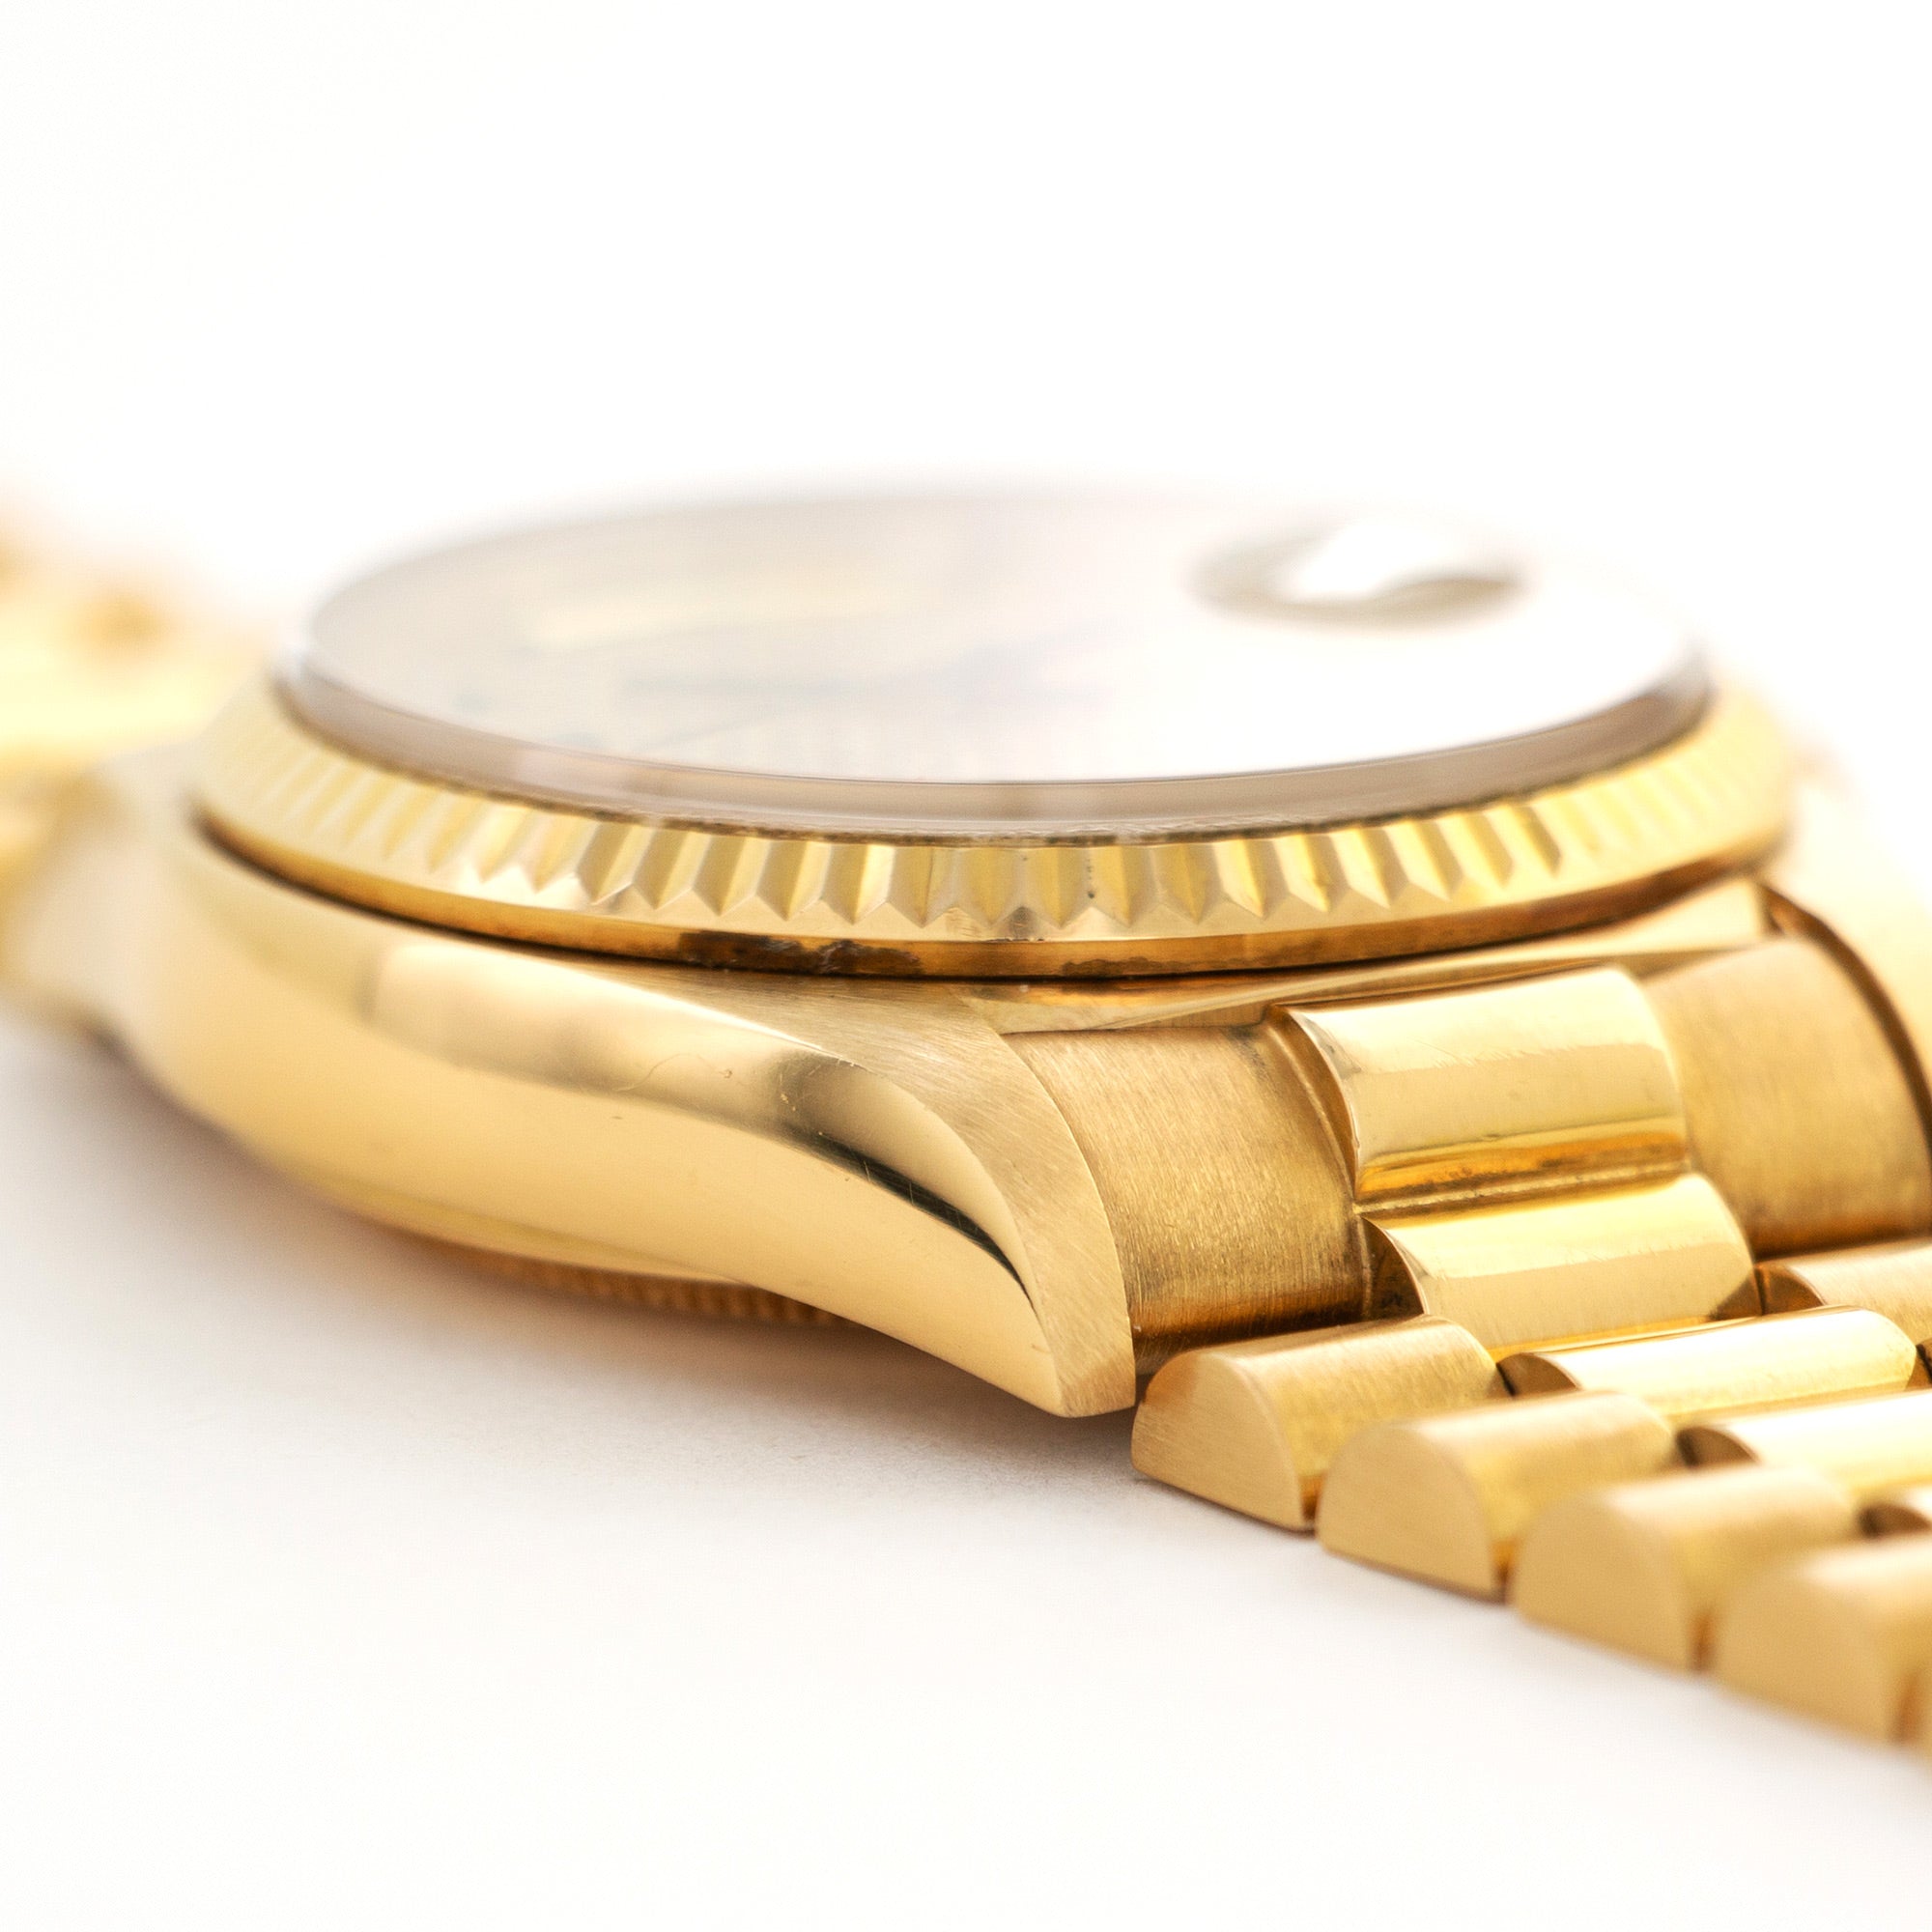 Rolex - Rolex Yellow Gold Day-Date Pave Diamond Watch, from 1981 - The Keystone Watches